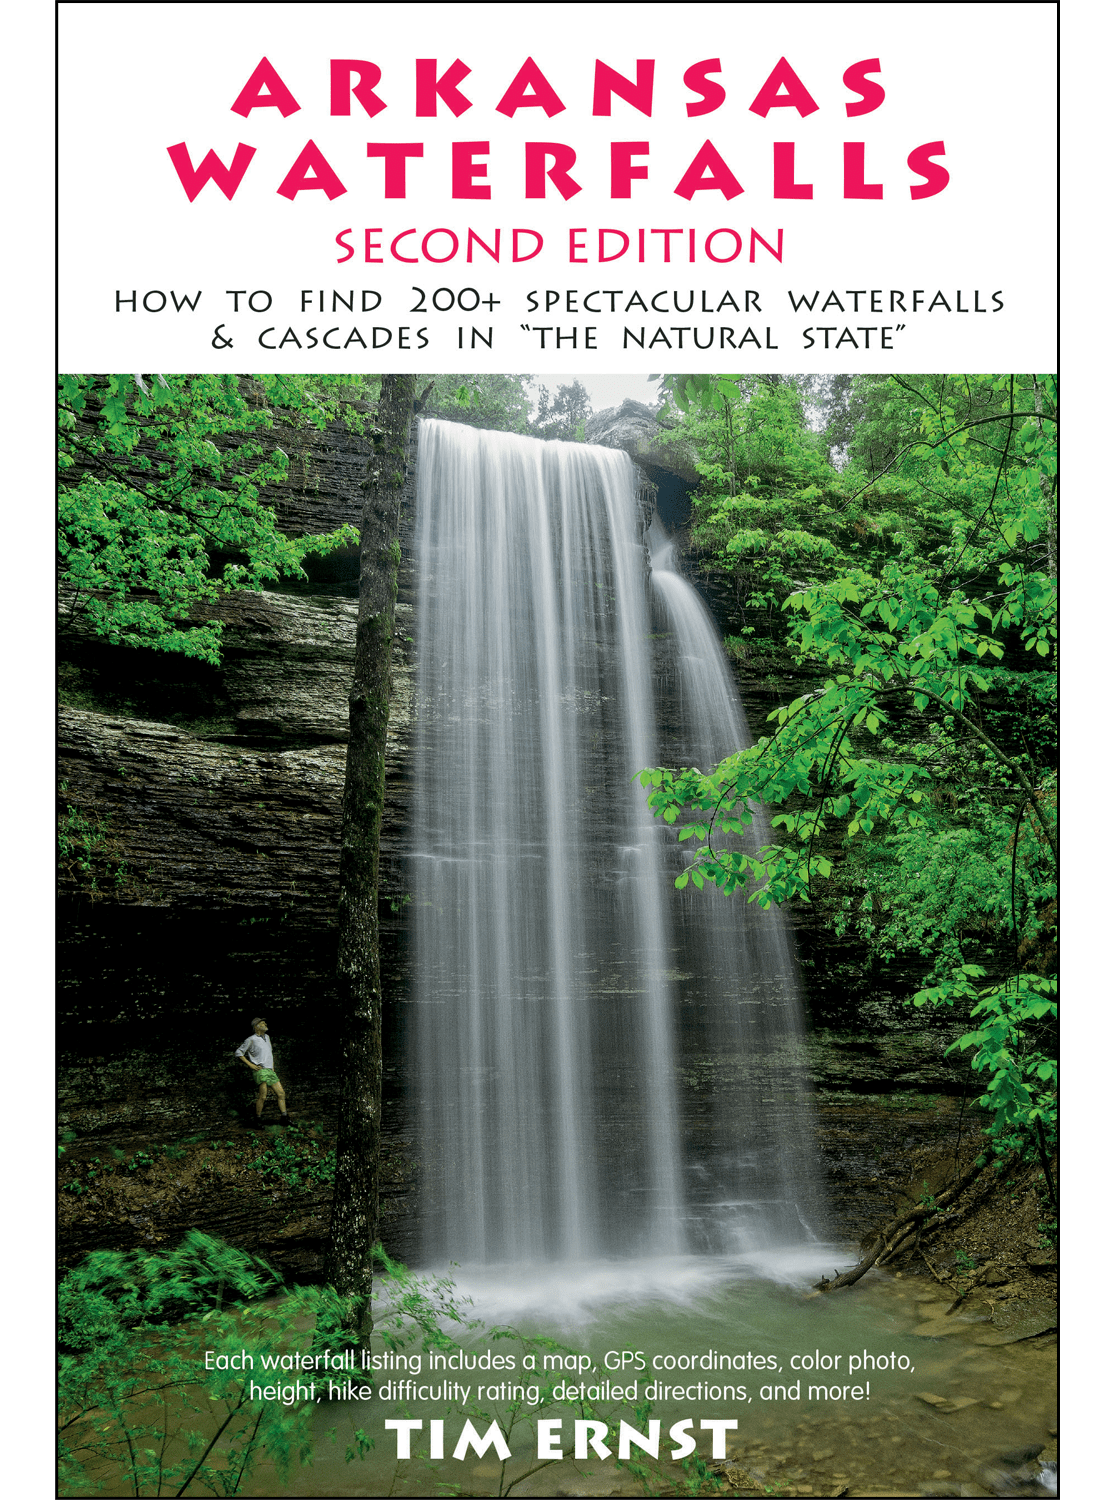 Arkansas Waterfalls Guidebook by Tim Ernst, a renowned nature photographer who captures breathtaking photographs of Arkansas waterfalls and mesmerizing Arkansas Nightscapes.